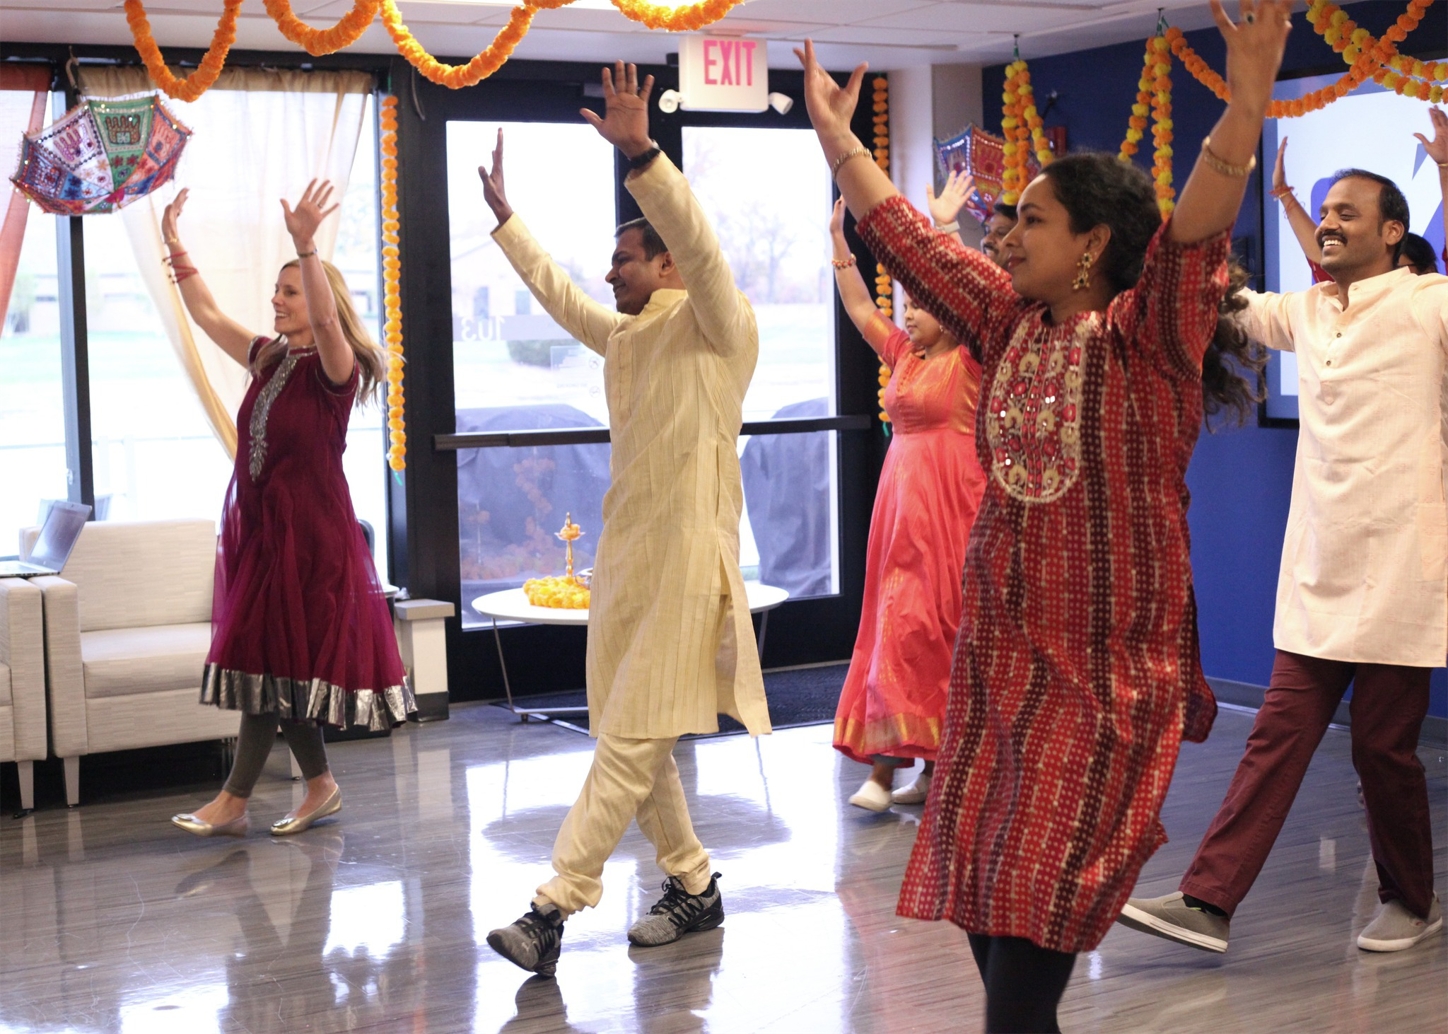 In honor of Diwali, the Festival of Lights, our Corporate IT department hosted their own celebration, inviting other employees to join in, with music, games and food!